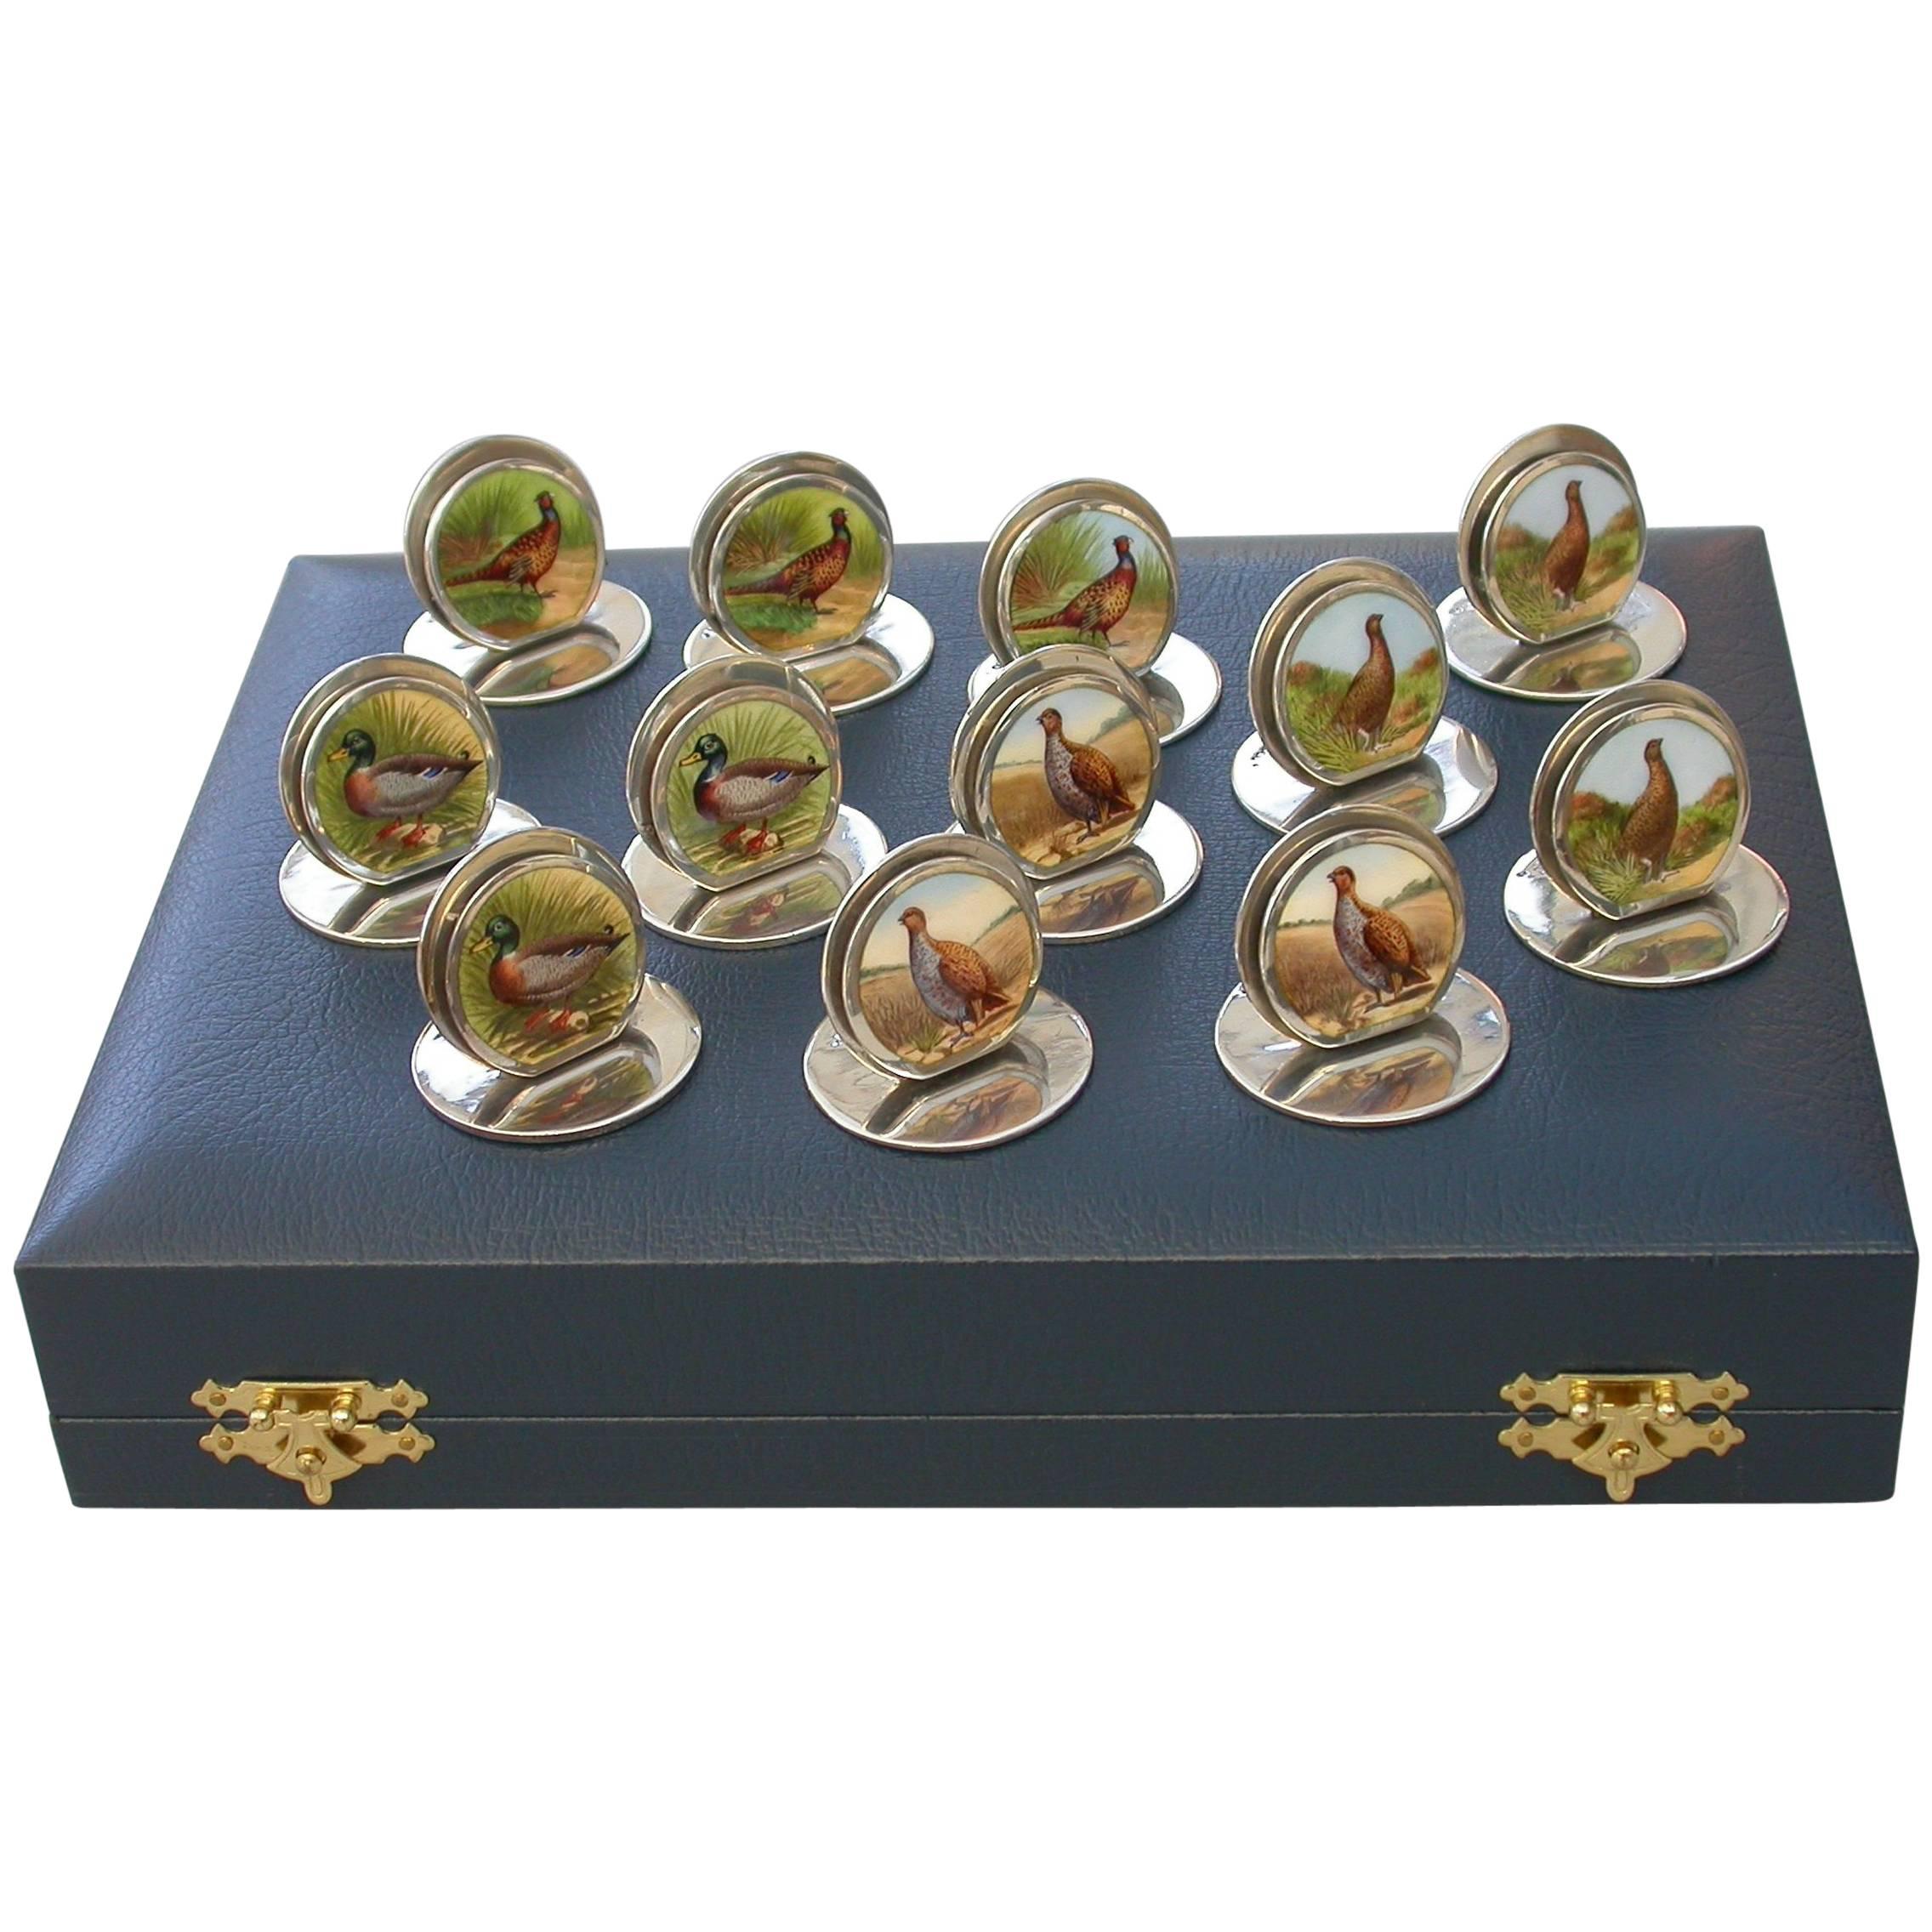 A superb composed set of 12 cased Edwardian silver and enamel game bird menu holders, of sprung double-disc form on flat circular bases. The faces finely enameled with portraits of cock pheasants, drake mallard, English partridge and red grouse. All